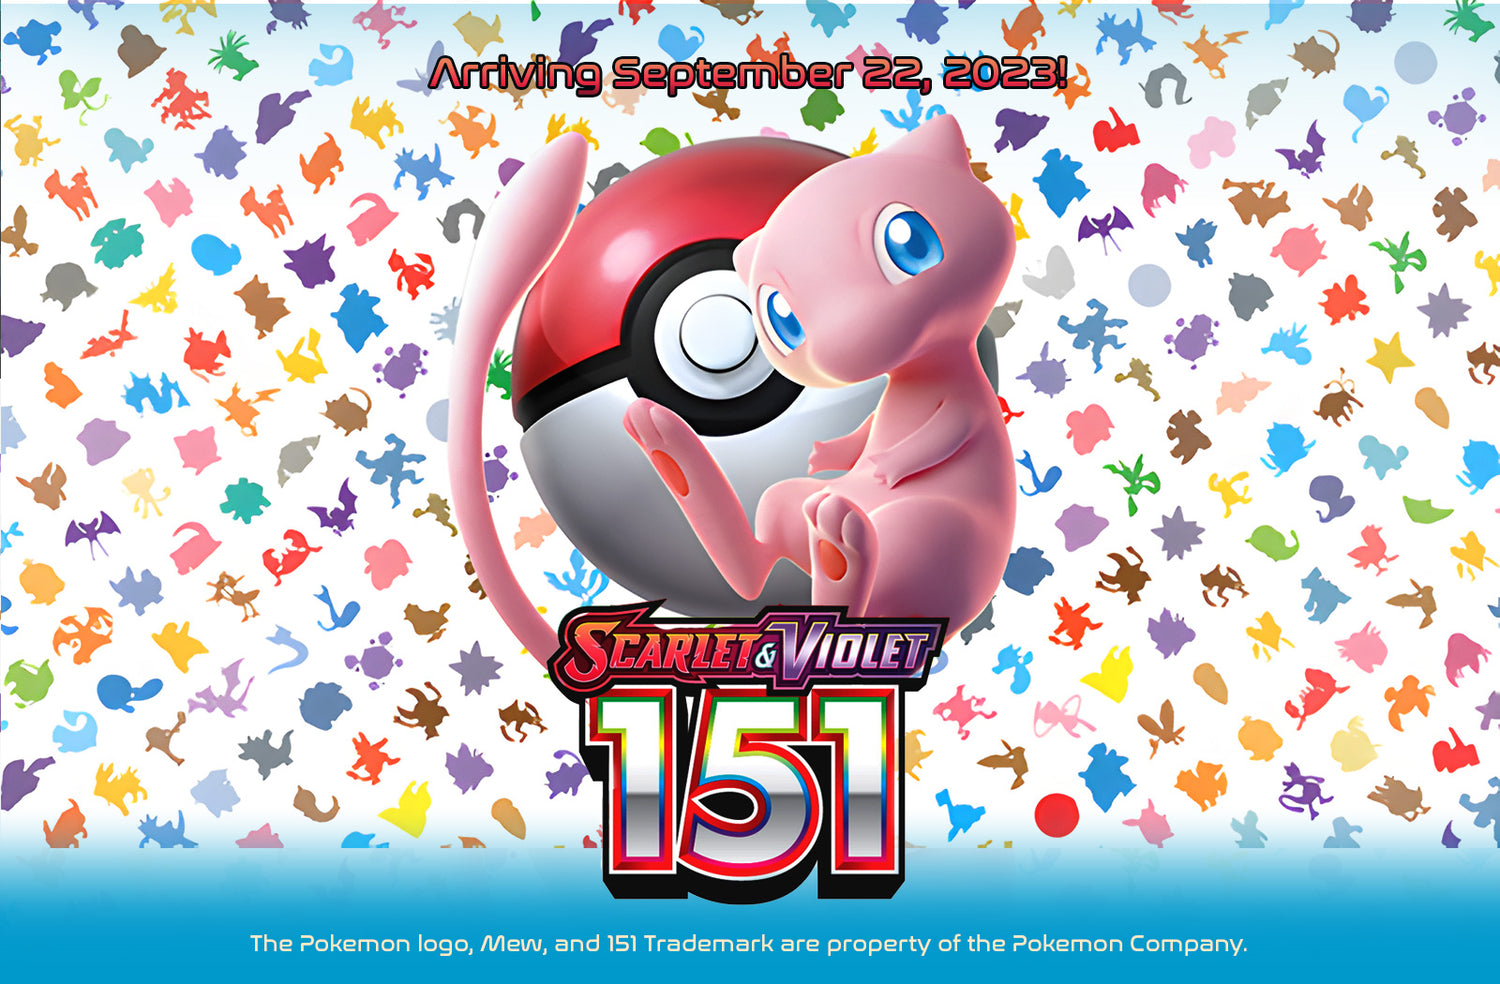 mew is sitting in front of a pokeball with 151 behind him. Several silhouettes of pokemon are arranged in bright colours in the background.